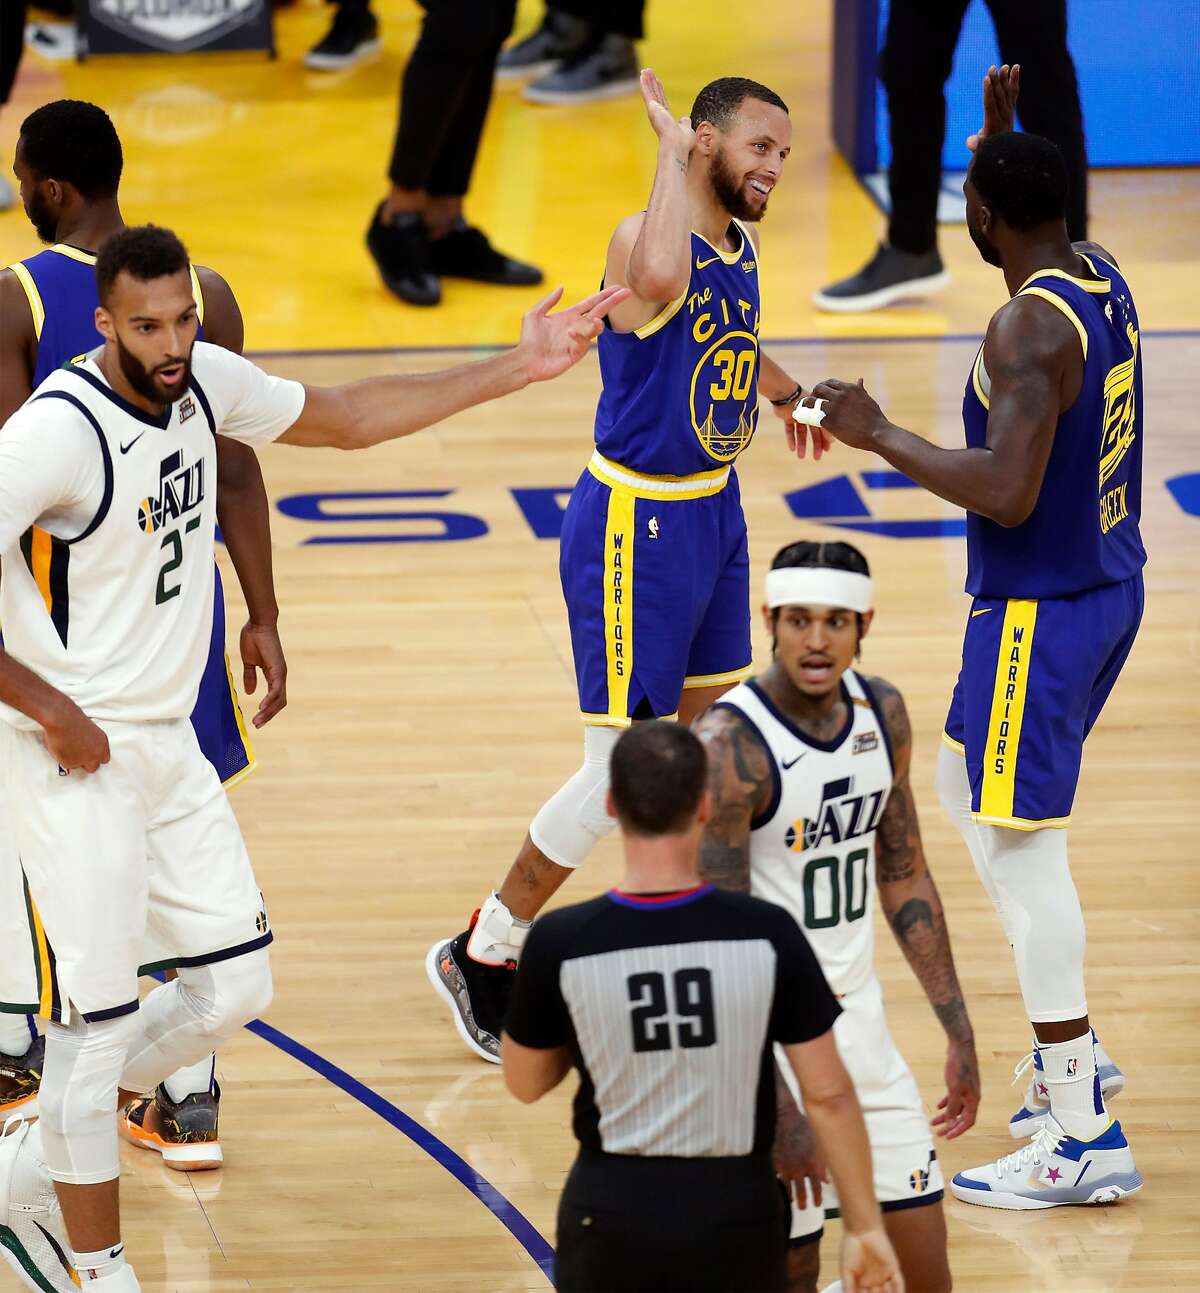 After hitting the go-ahead trey, the Warriors’ Stephen Curry high-fives Draymond Green as Jazz players question an official.